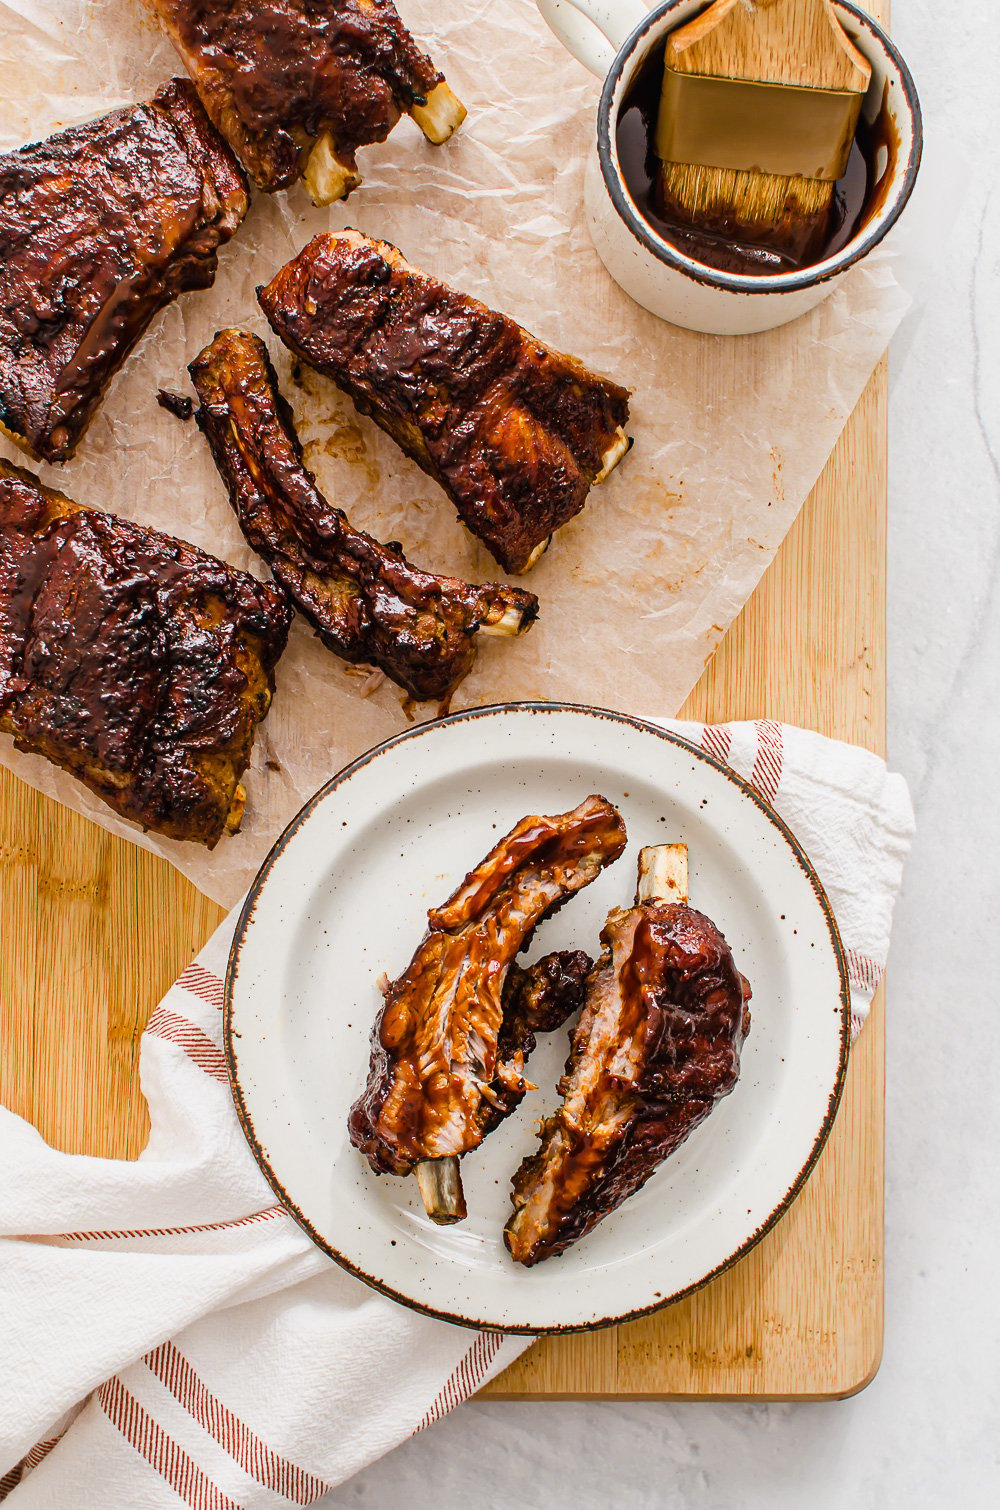 BBQ ribs on a cutting board with extra sauce on the side.